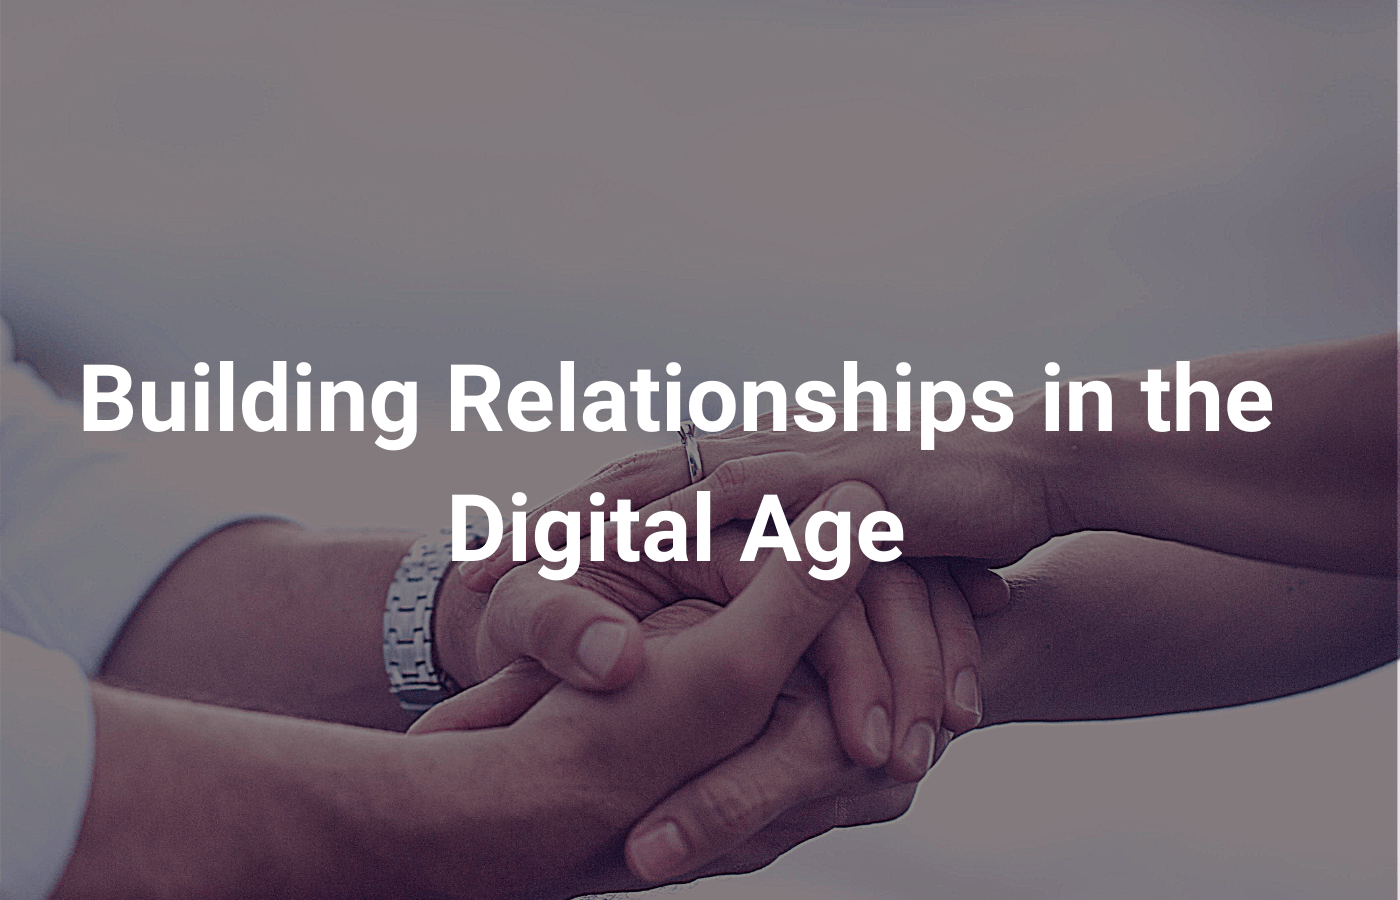 Building Relationships in the Digital Age